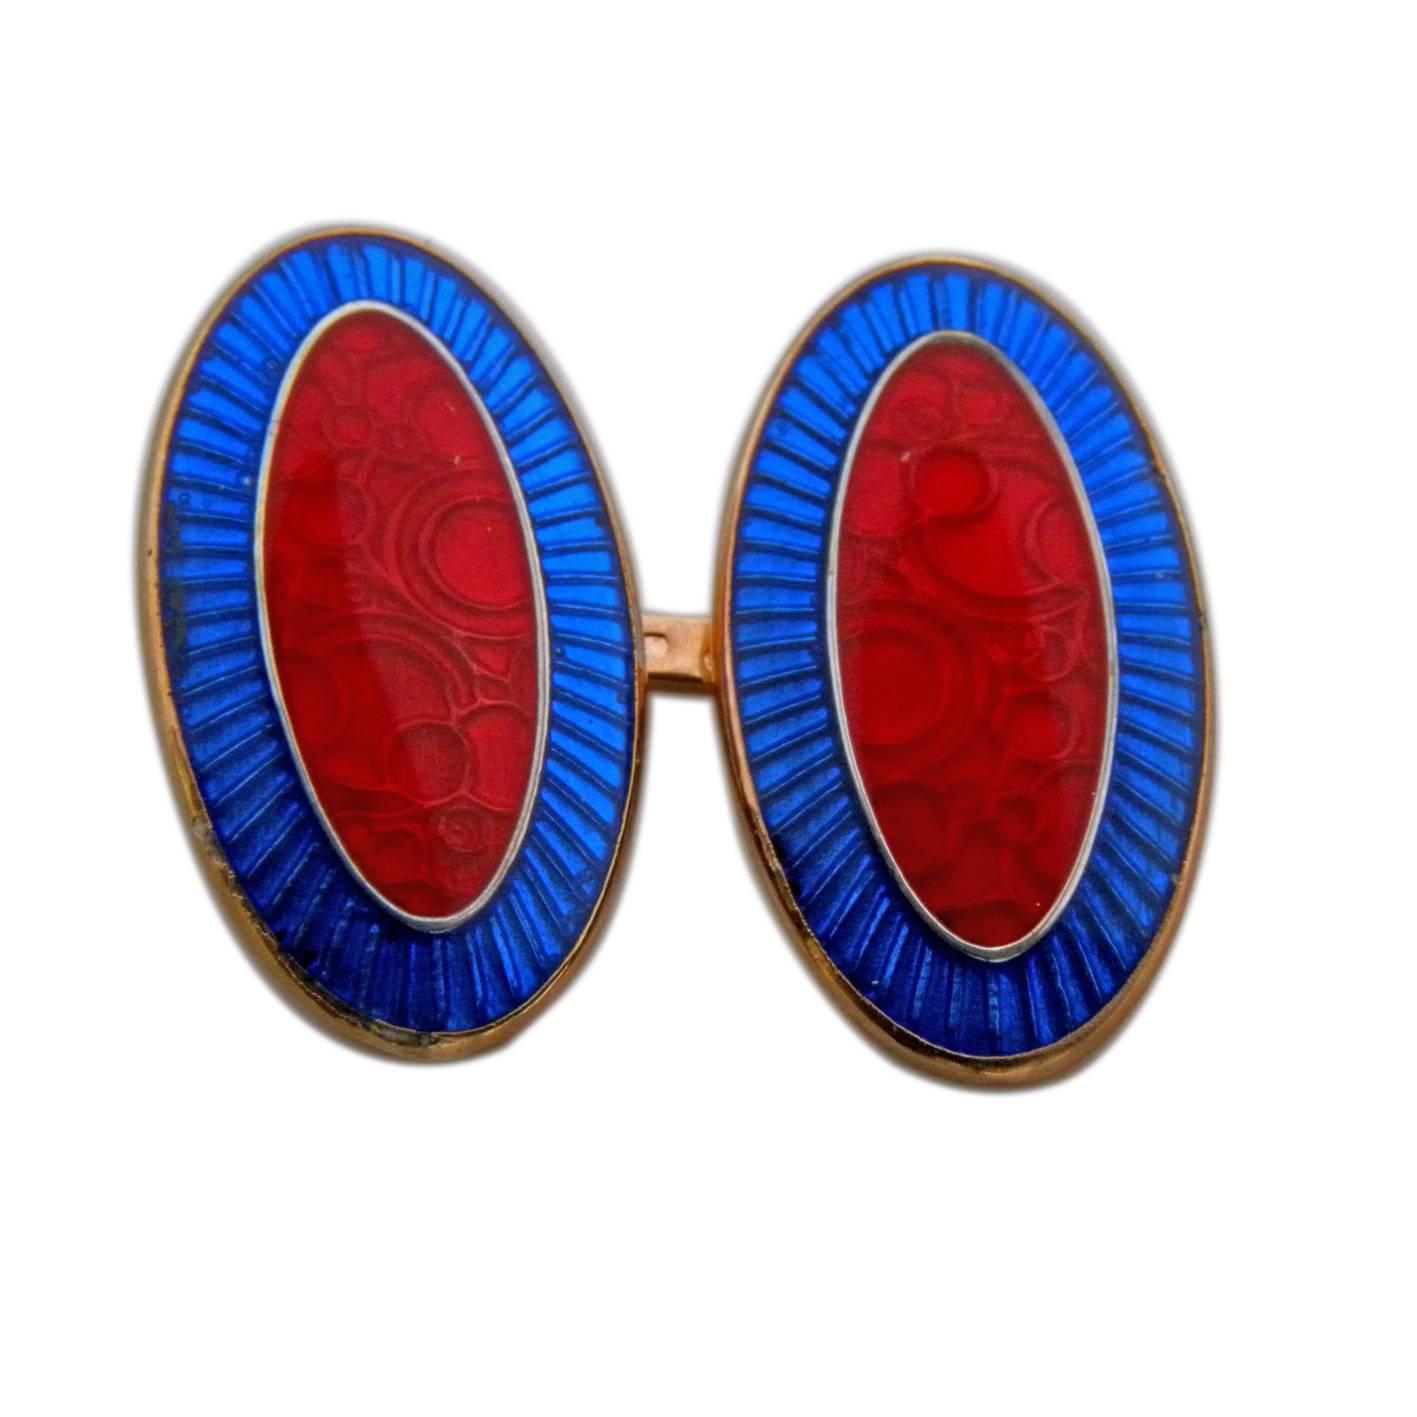 A limited edition of an old Pair of cufflinks found in Berca's archive, enamelled with the antique champslevé technique, rose gold plate sterling silver